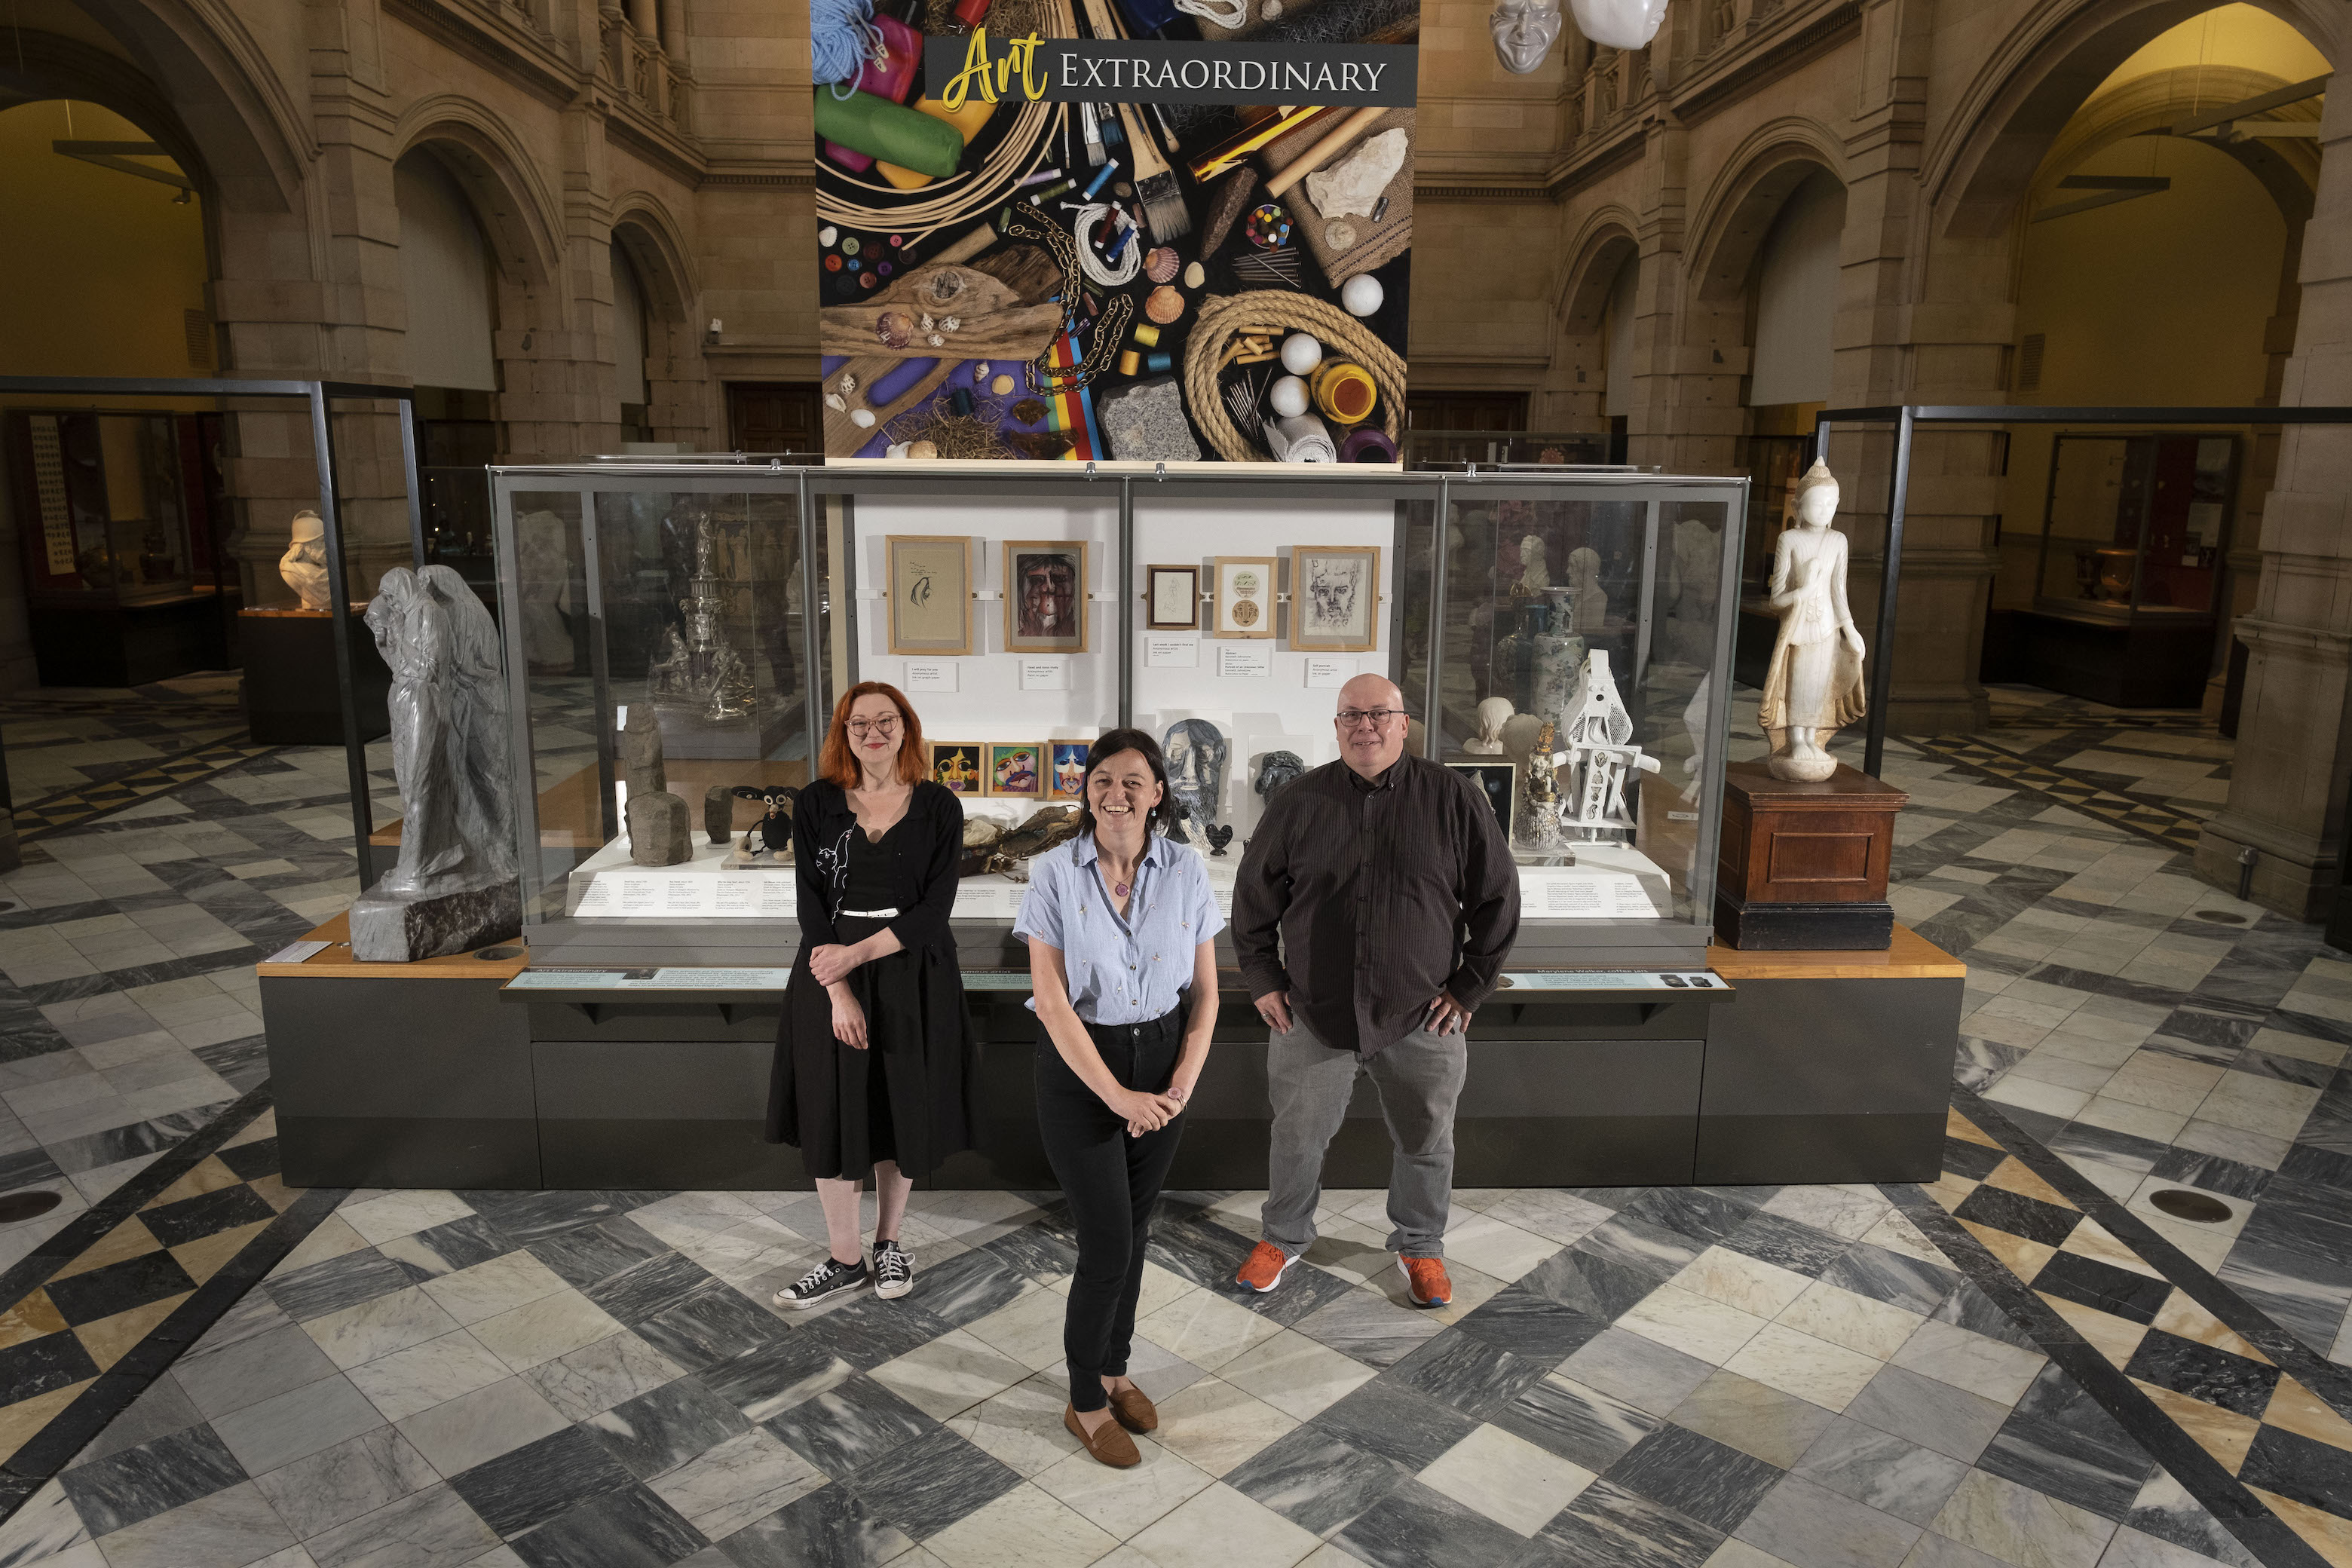 Dr Cheryl McGeachan, Dr Anthony Lewis and Claire Coia at the Art Extraordinary display at Kelvingrove Art Gallery and Museum